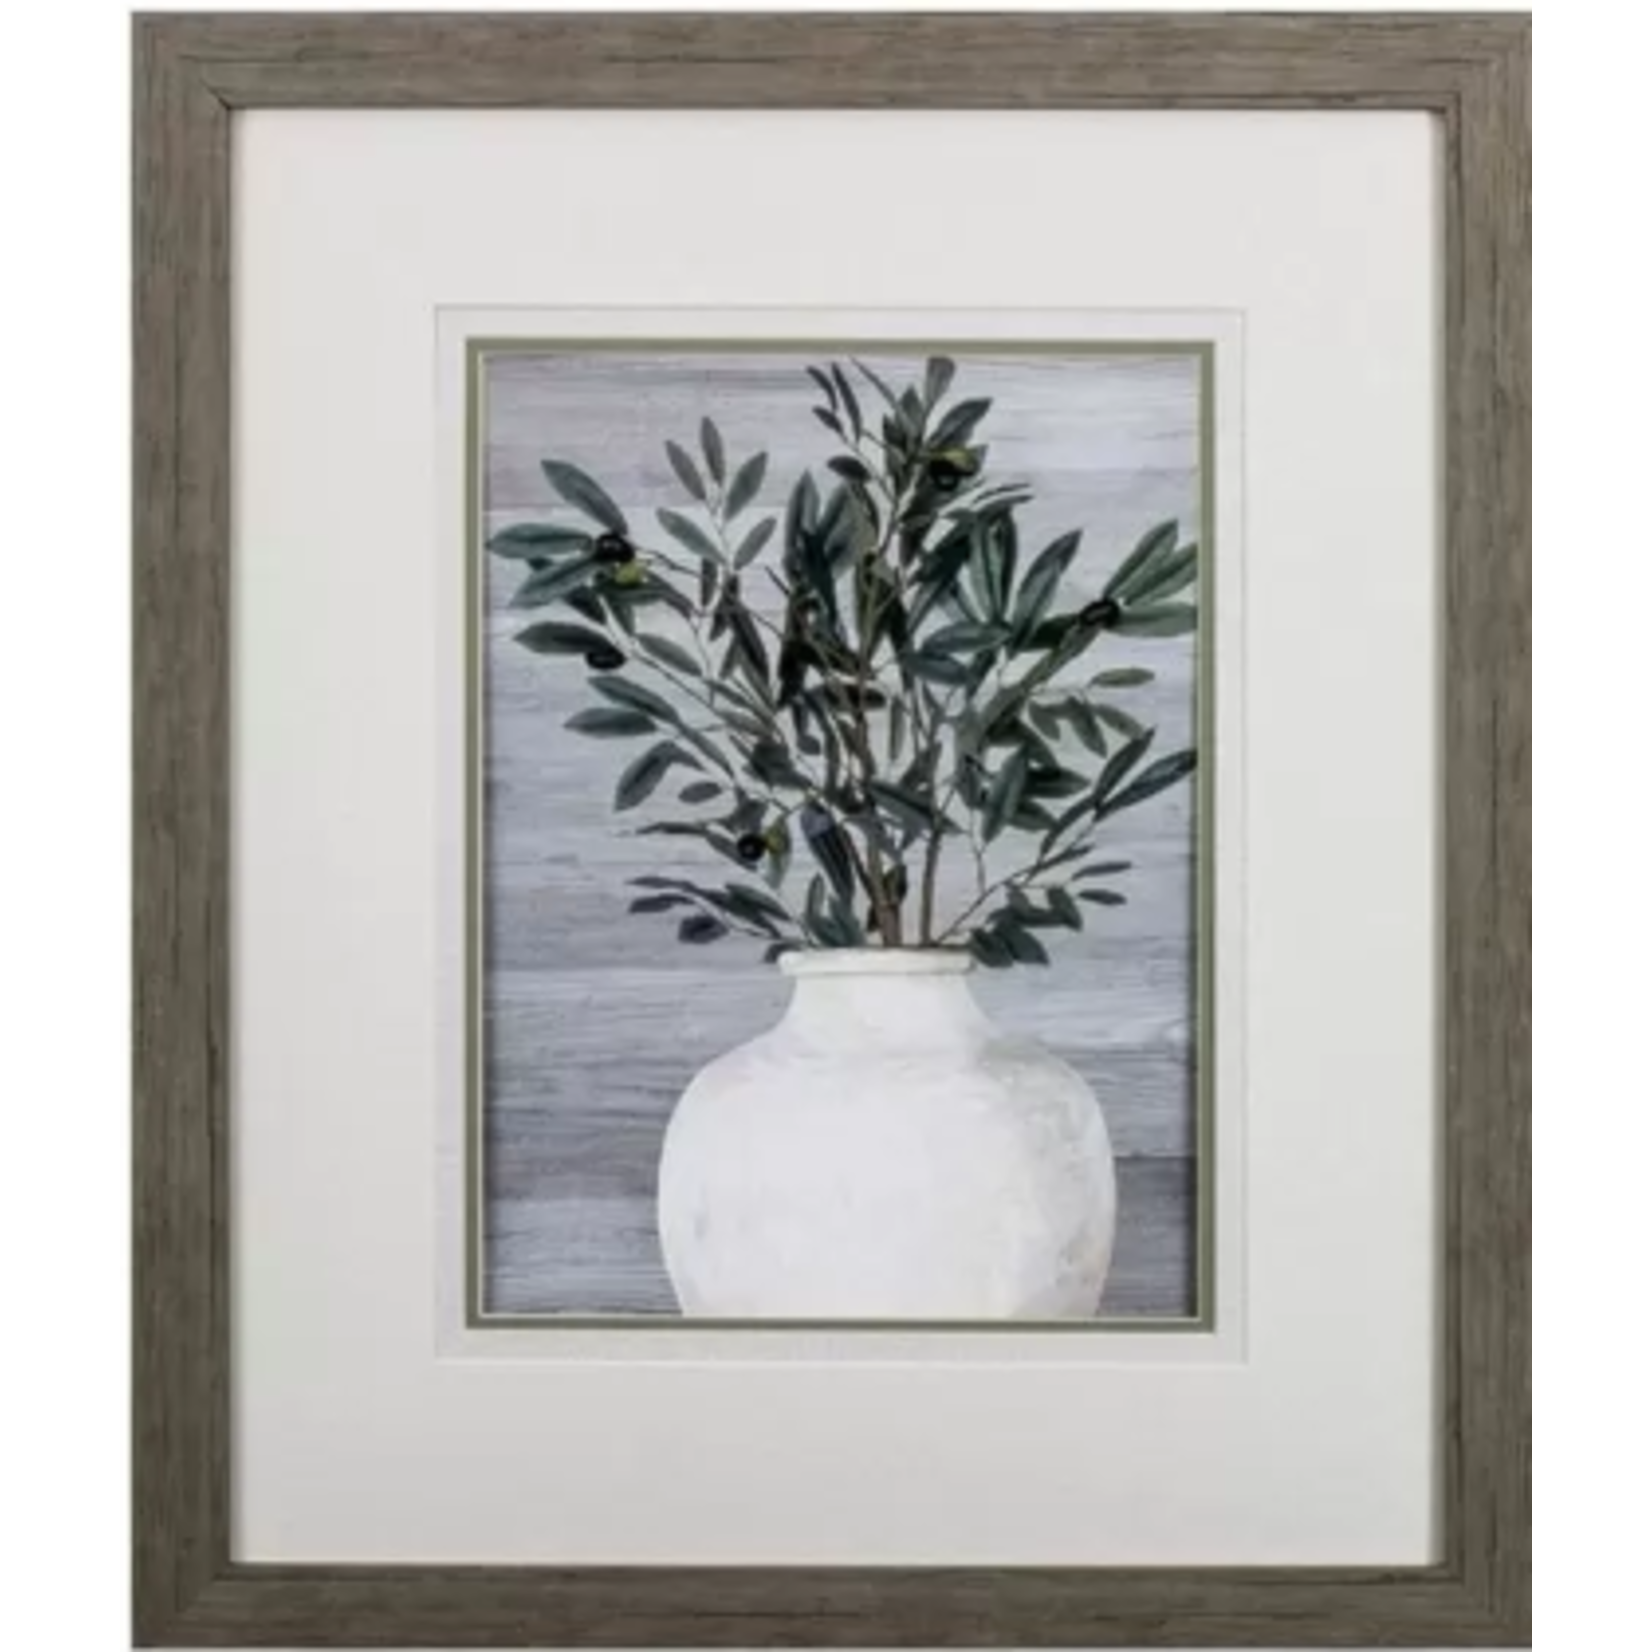 PROPAC IMAGES WHITE VASE DOUBLE MATTED IMAGES